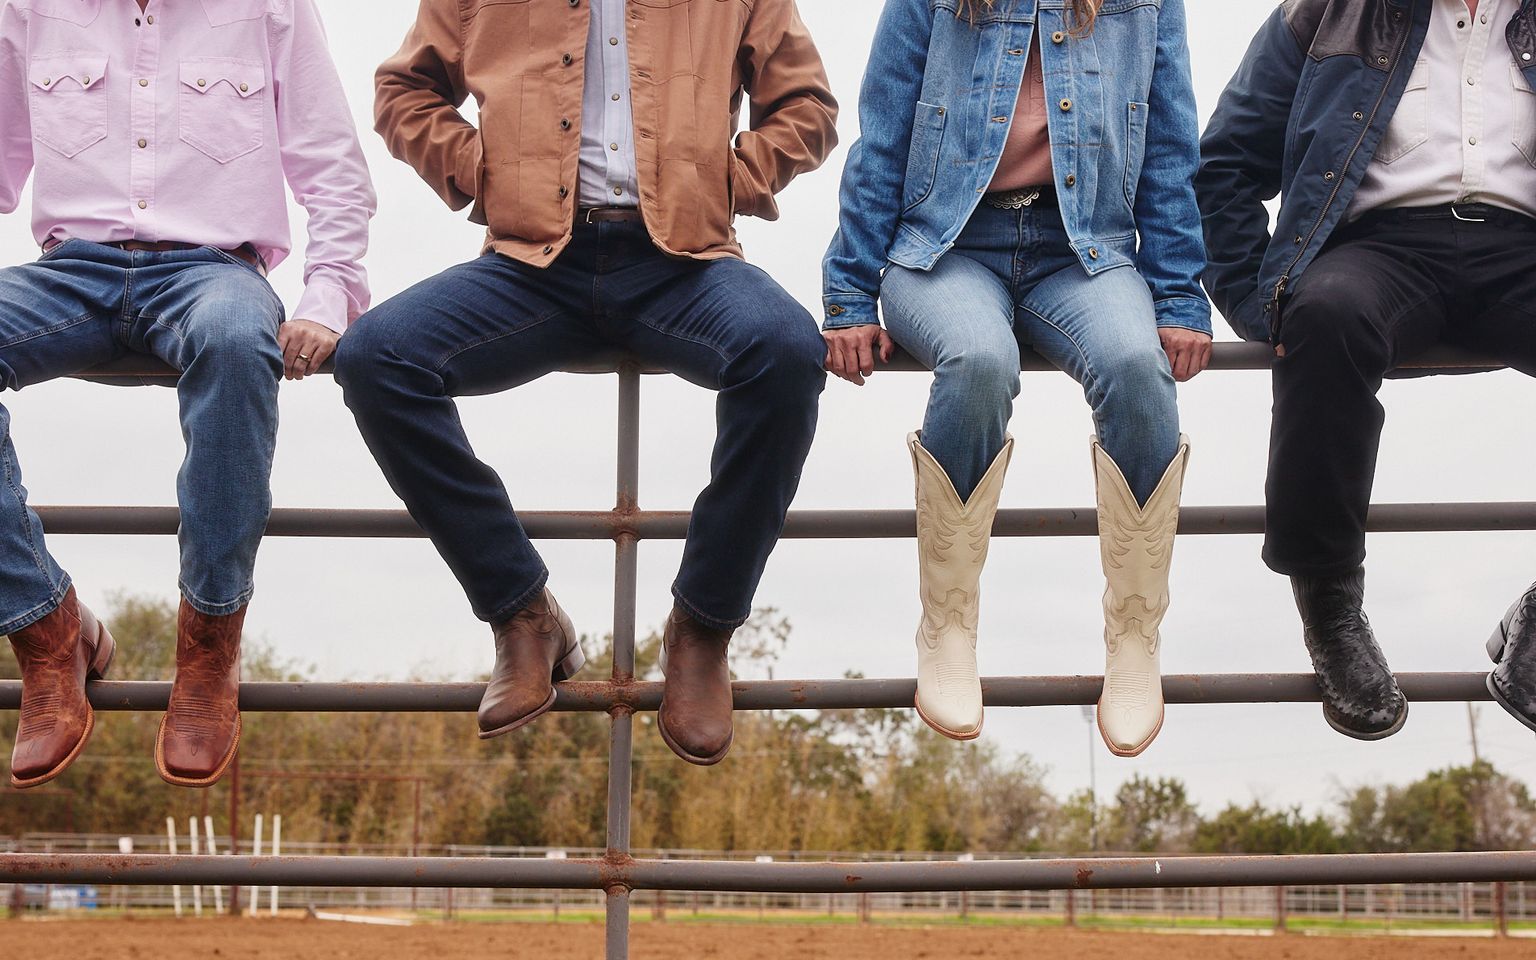 A group of people outside sitting on a rodeo fence wearing Tecovas boots and denim.